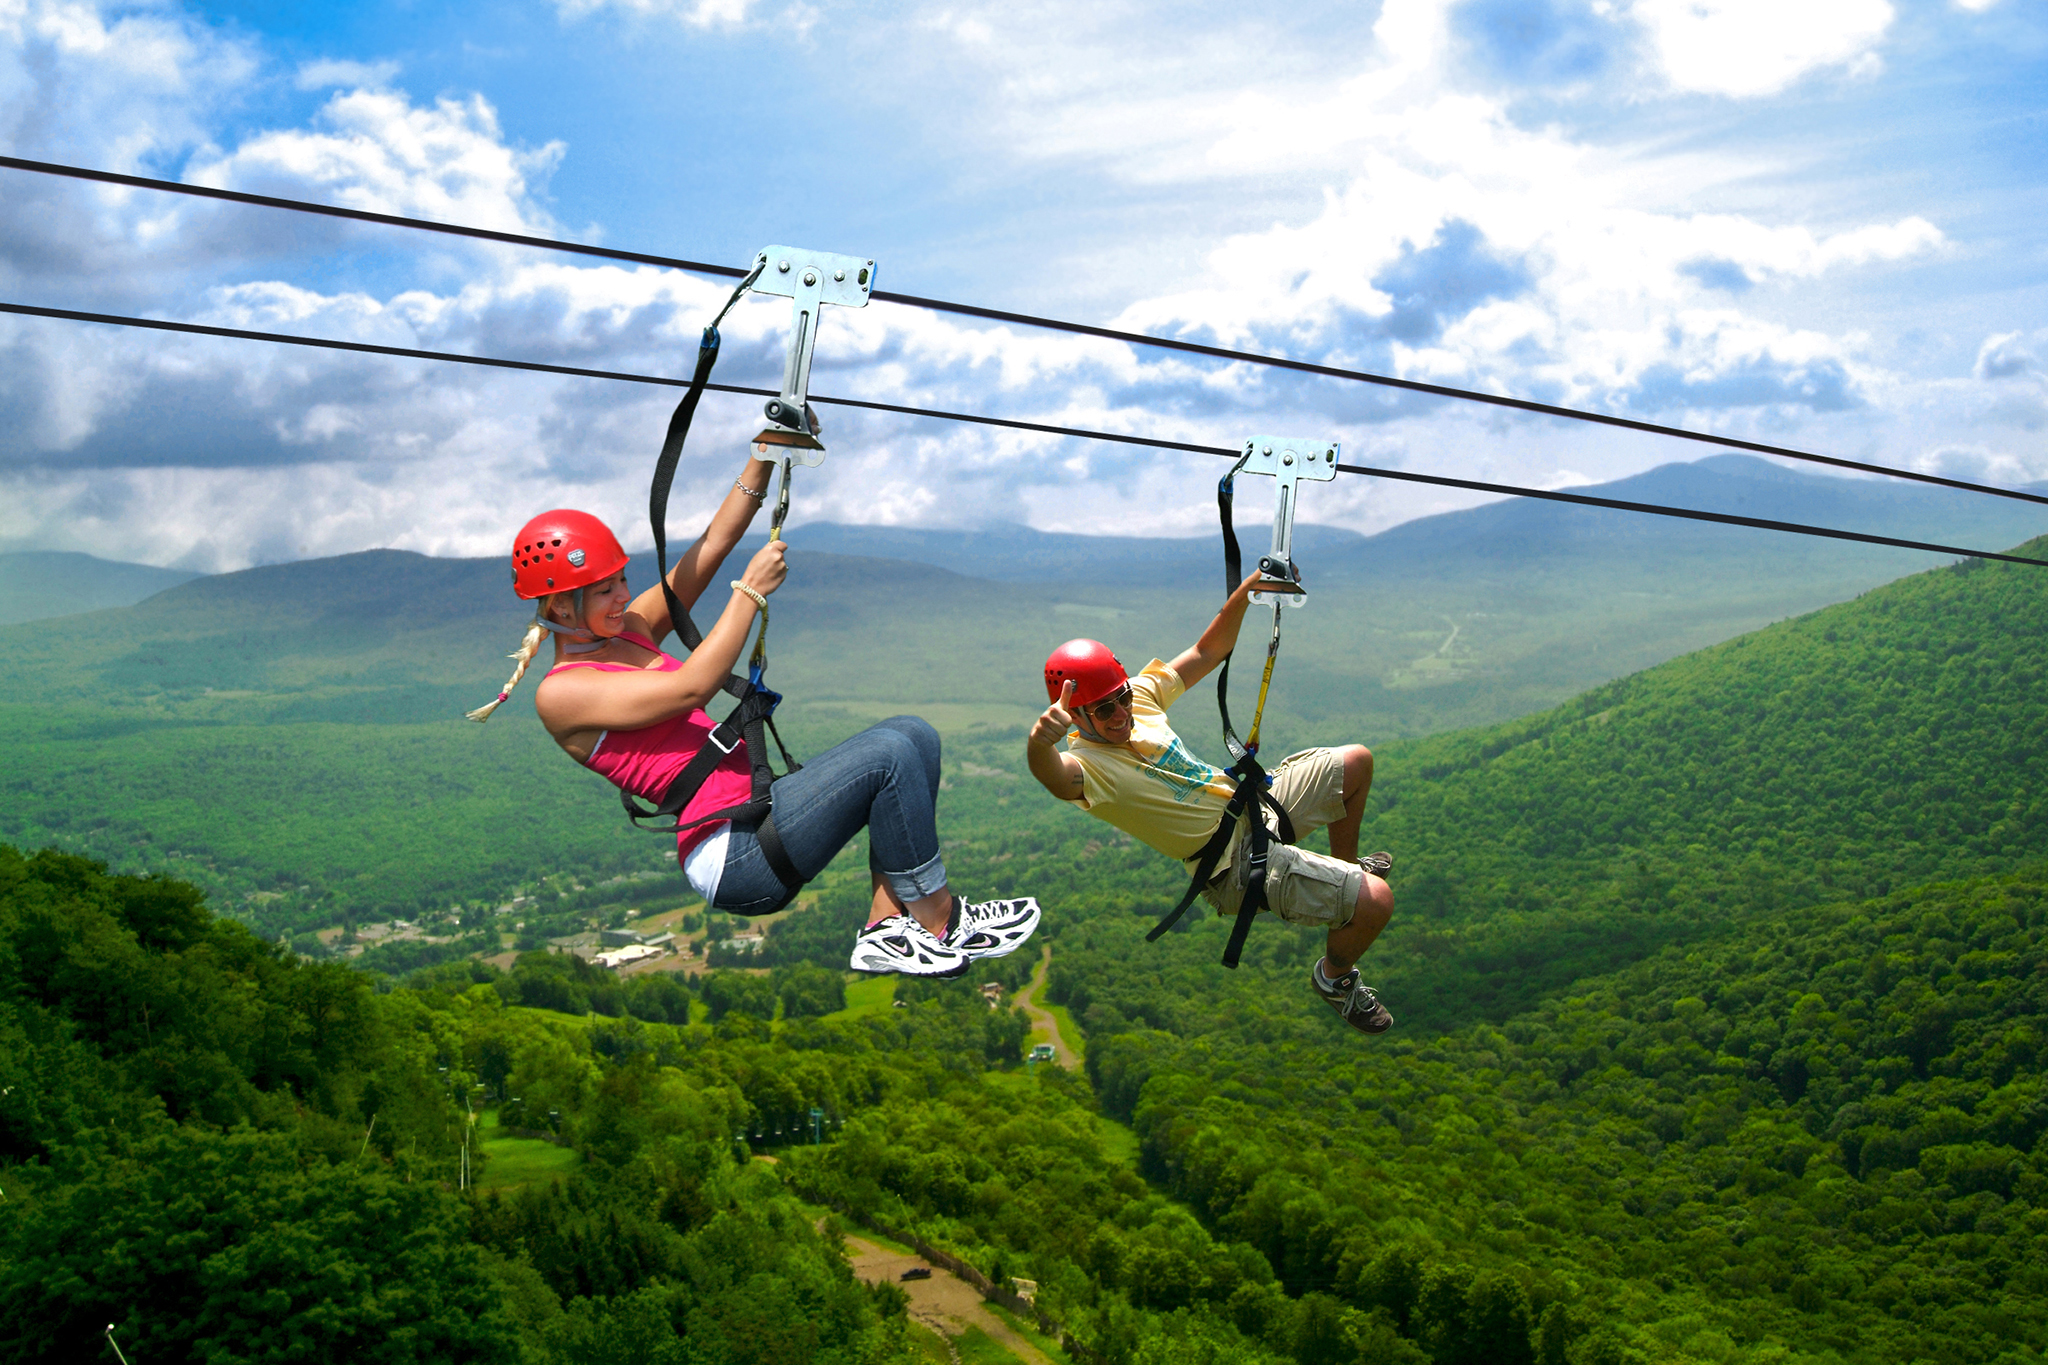 10 Extreme Sports Near NYC That All Daredevils Should Try